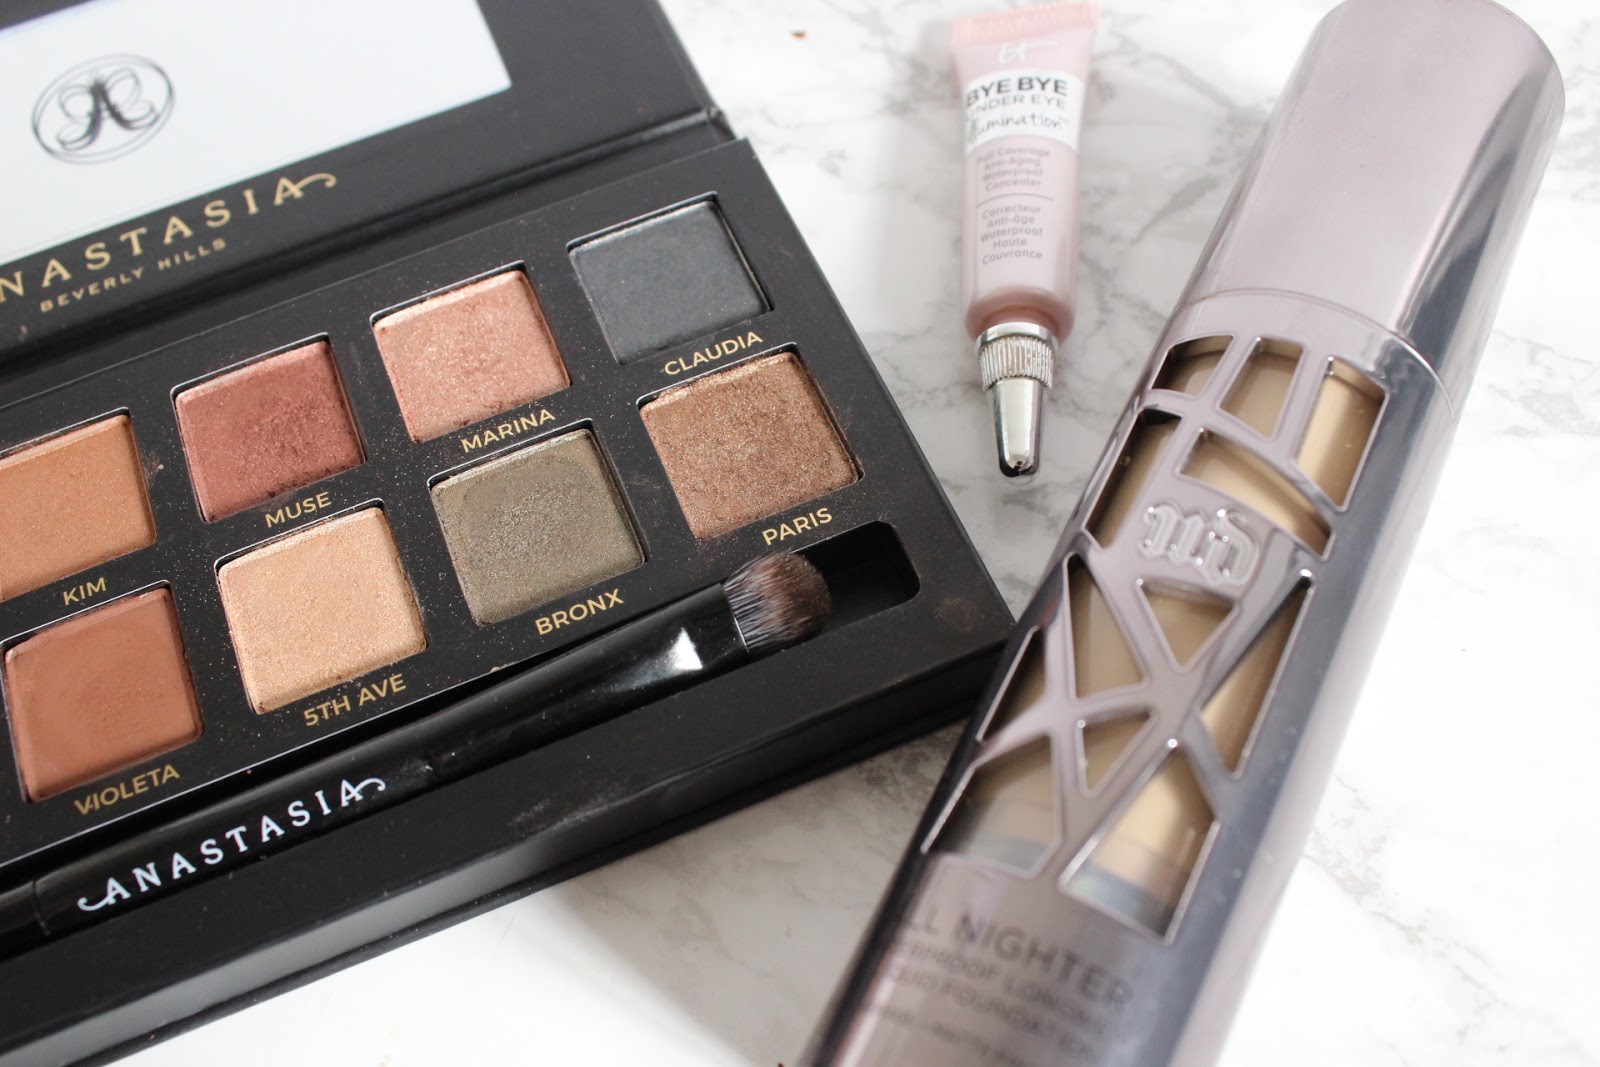 October Favourites - Master Palette by Mario, IT Cosmetics Bye Bye Under Eye Illumination, Urban Decay All Nighter Foundation